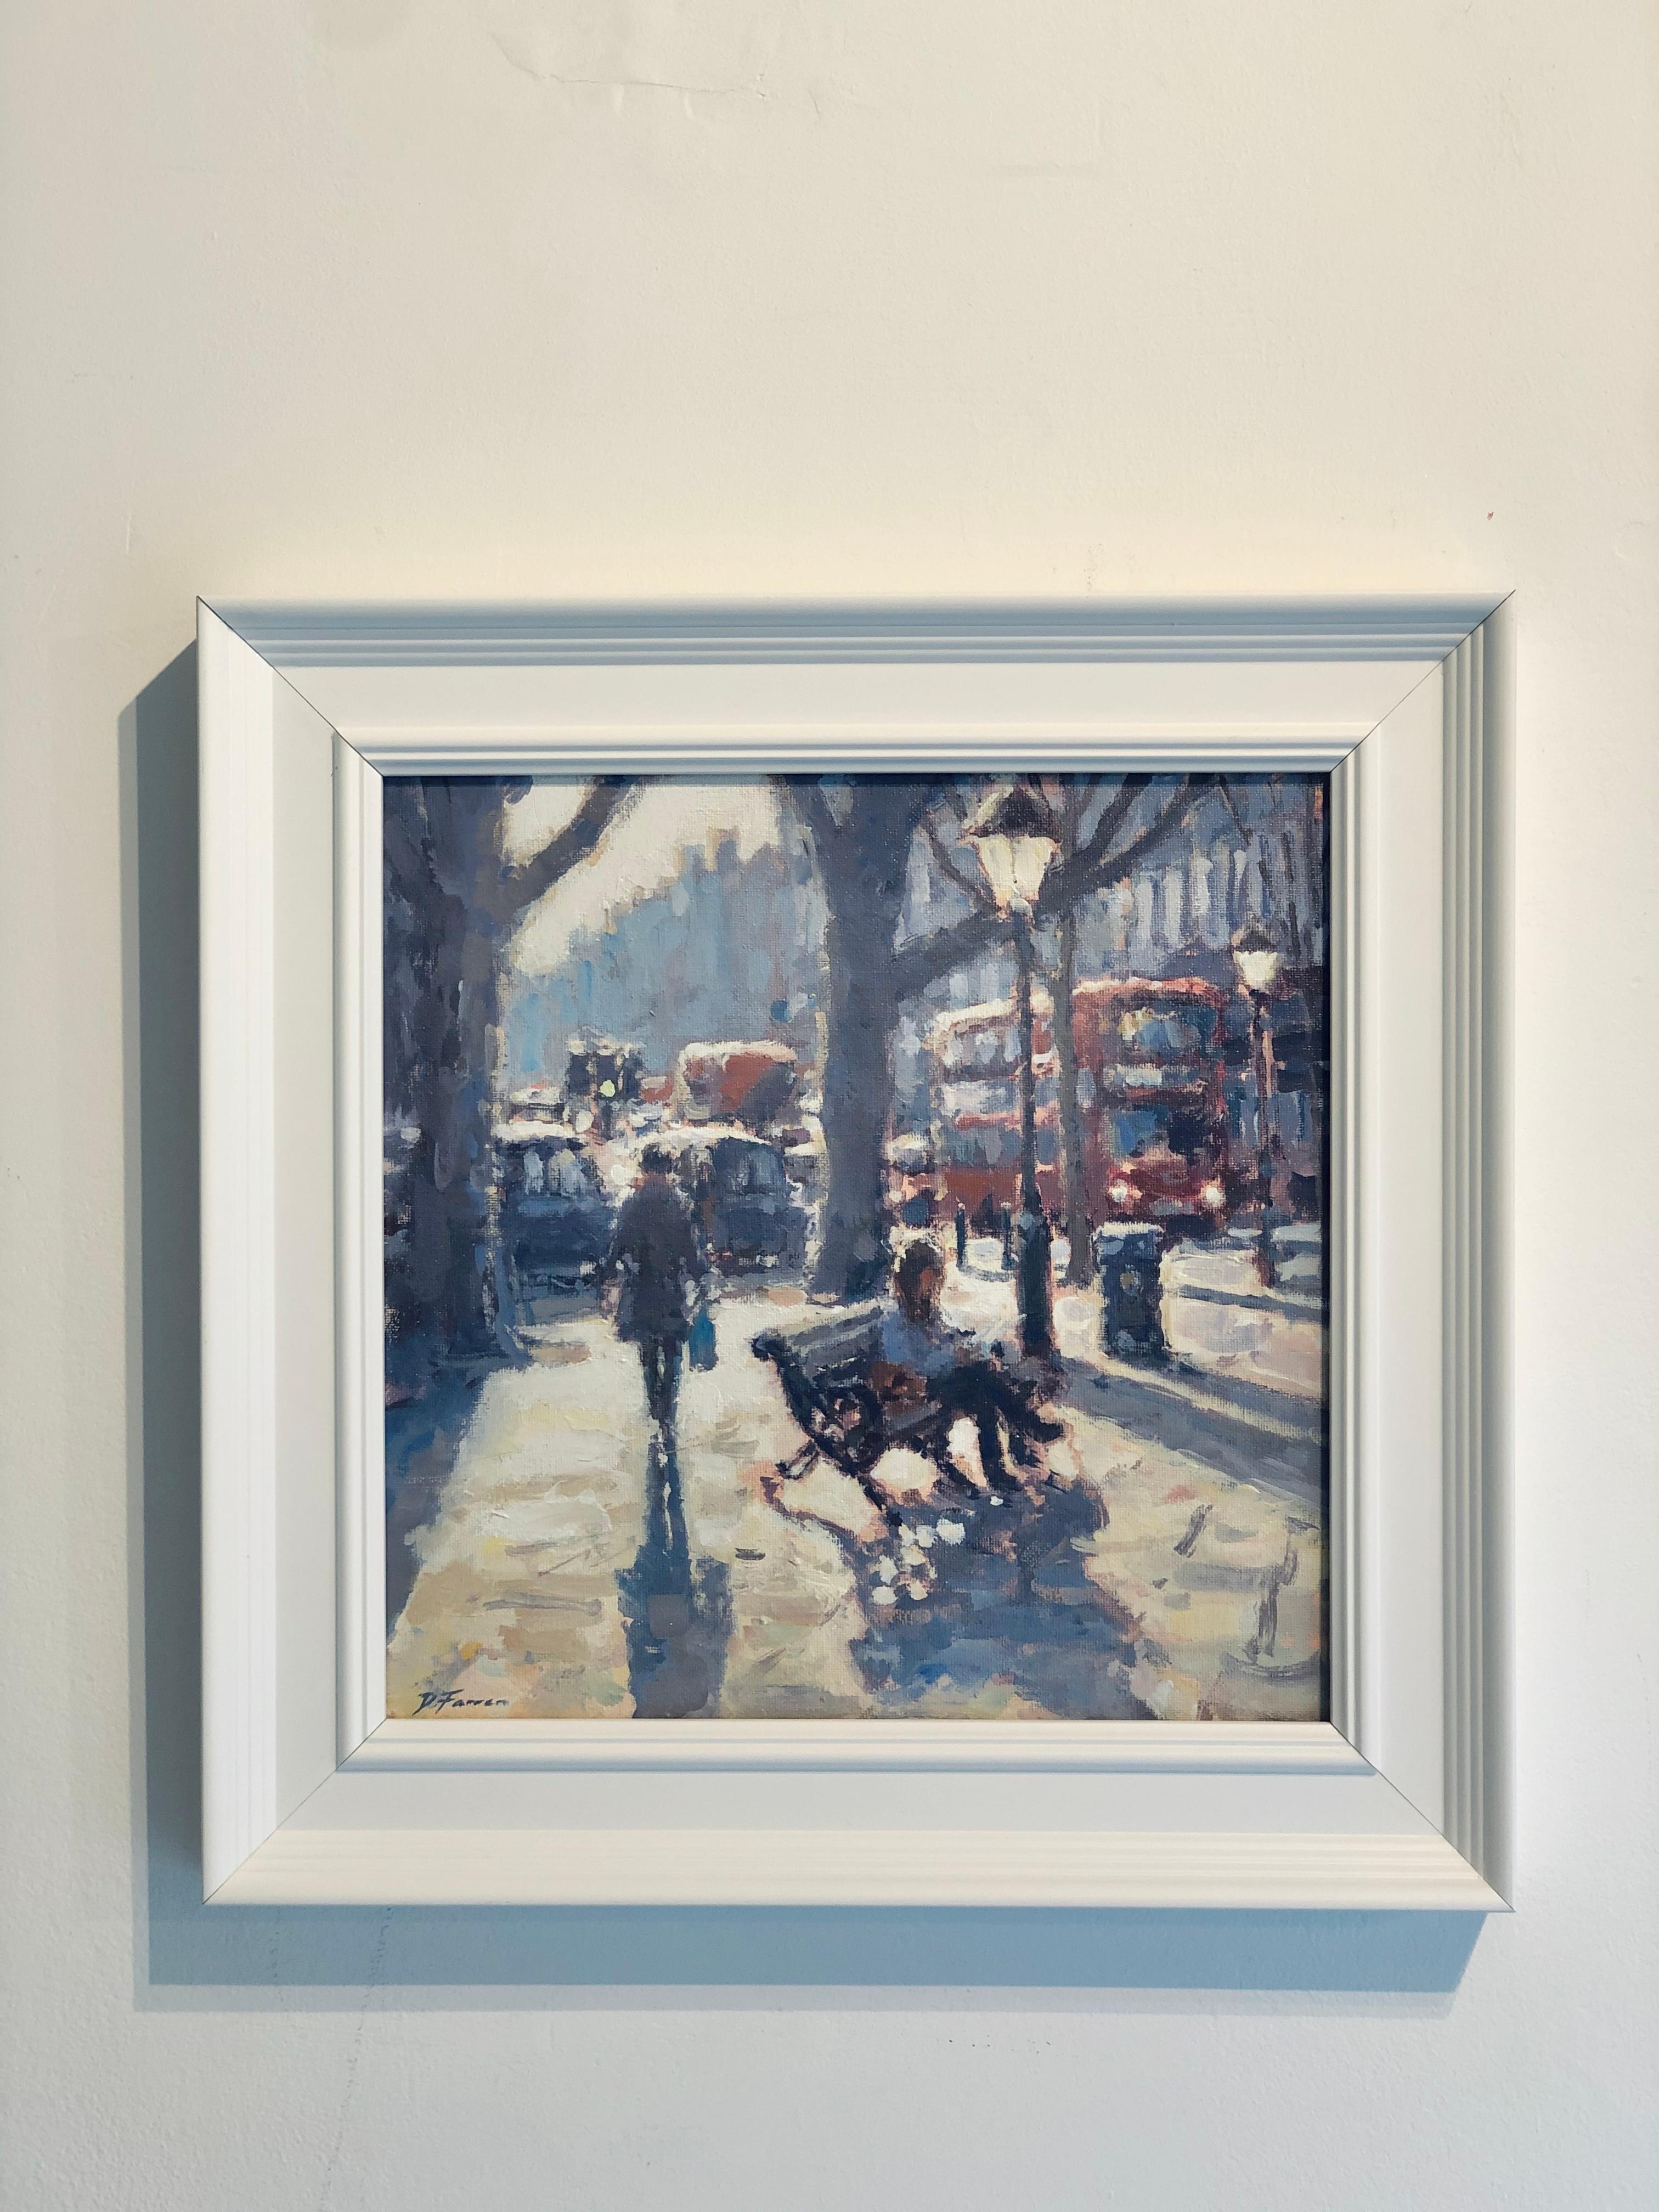 A Lunchtime Read, Sloane Square - cityscape artwork modern urban impressionism  - Painting by David Farren